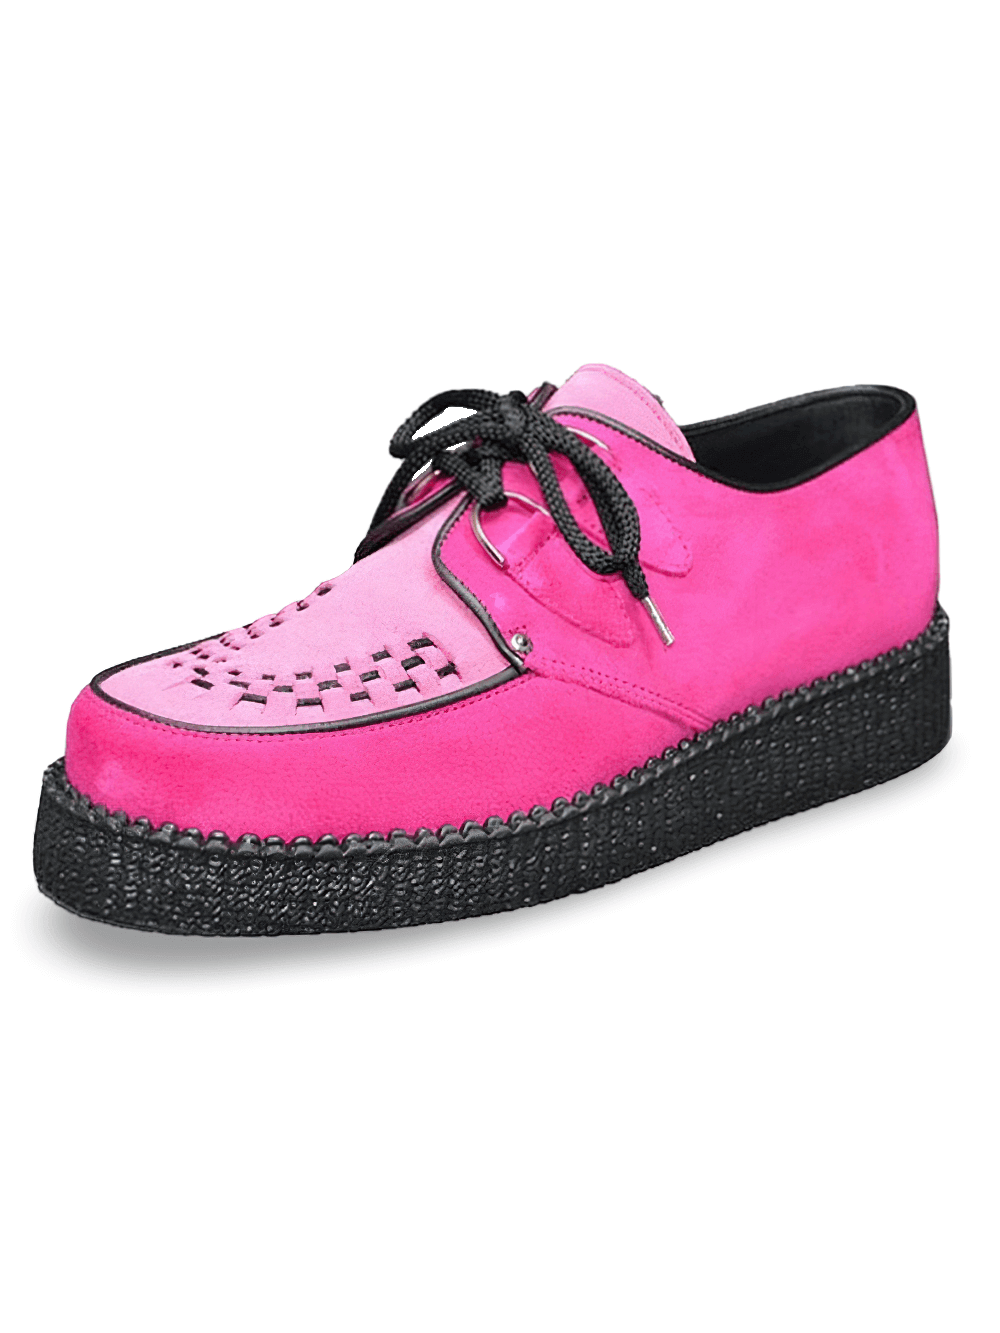 Round Toe Suede Creepers with Microfiber Insole